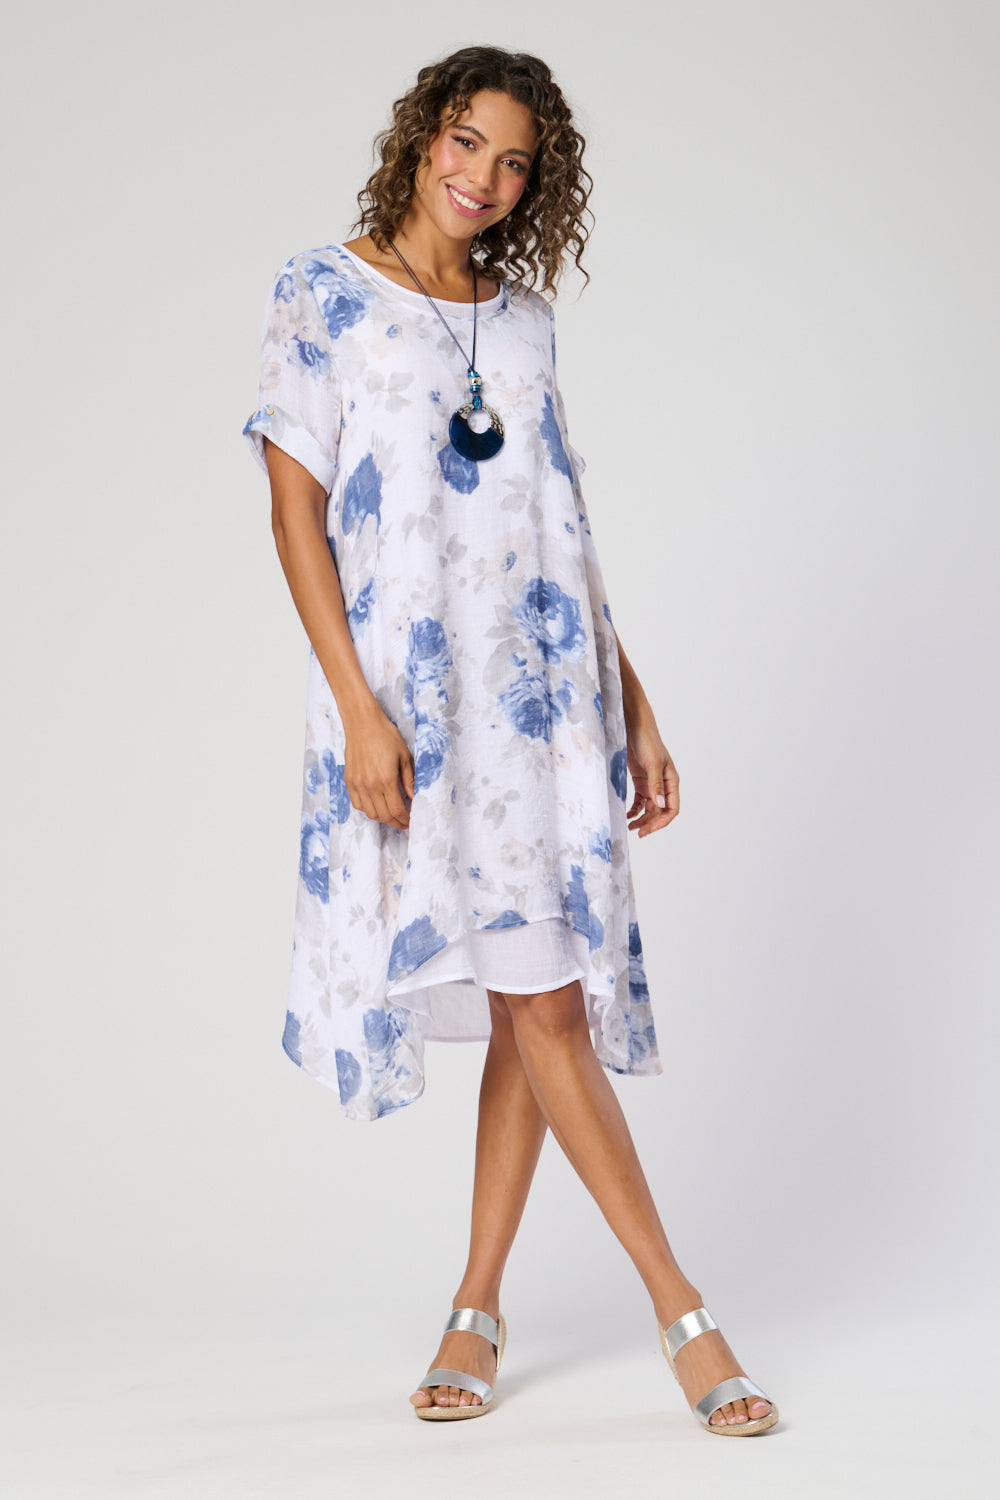 Saloos Print Double Layer Dress with Necklace